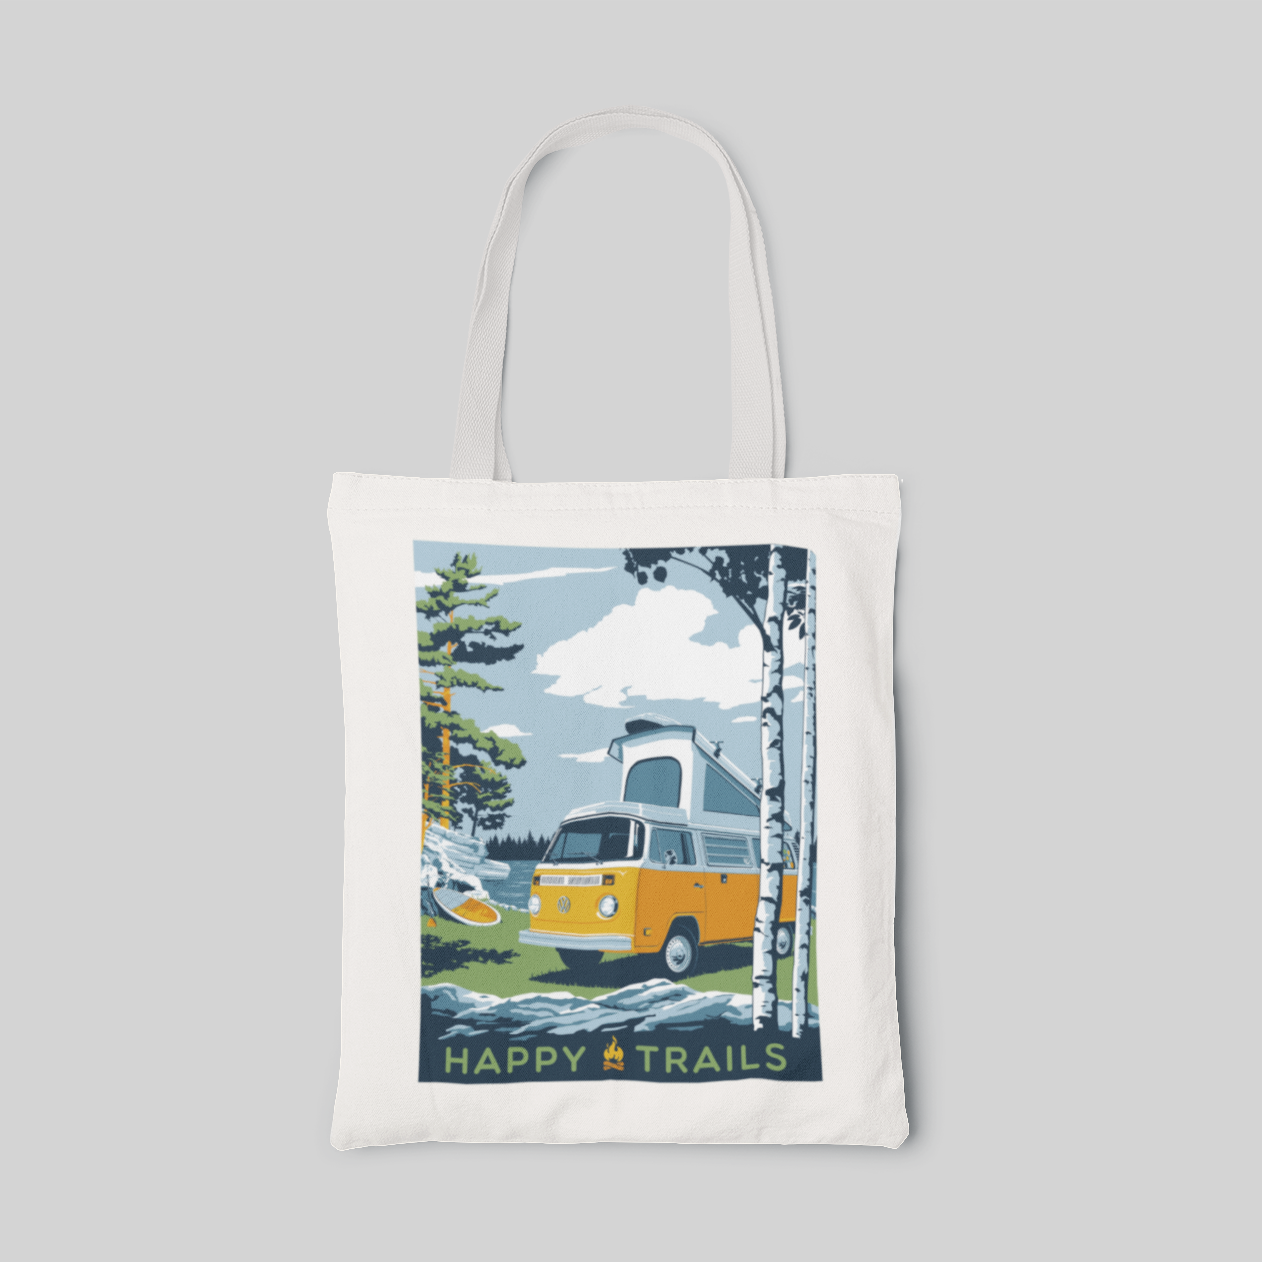 White tote bag with camping illustrations and yellow bus